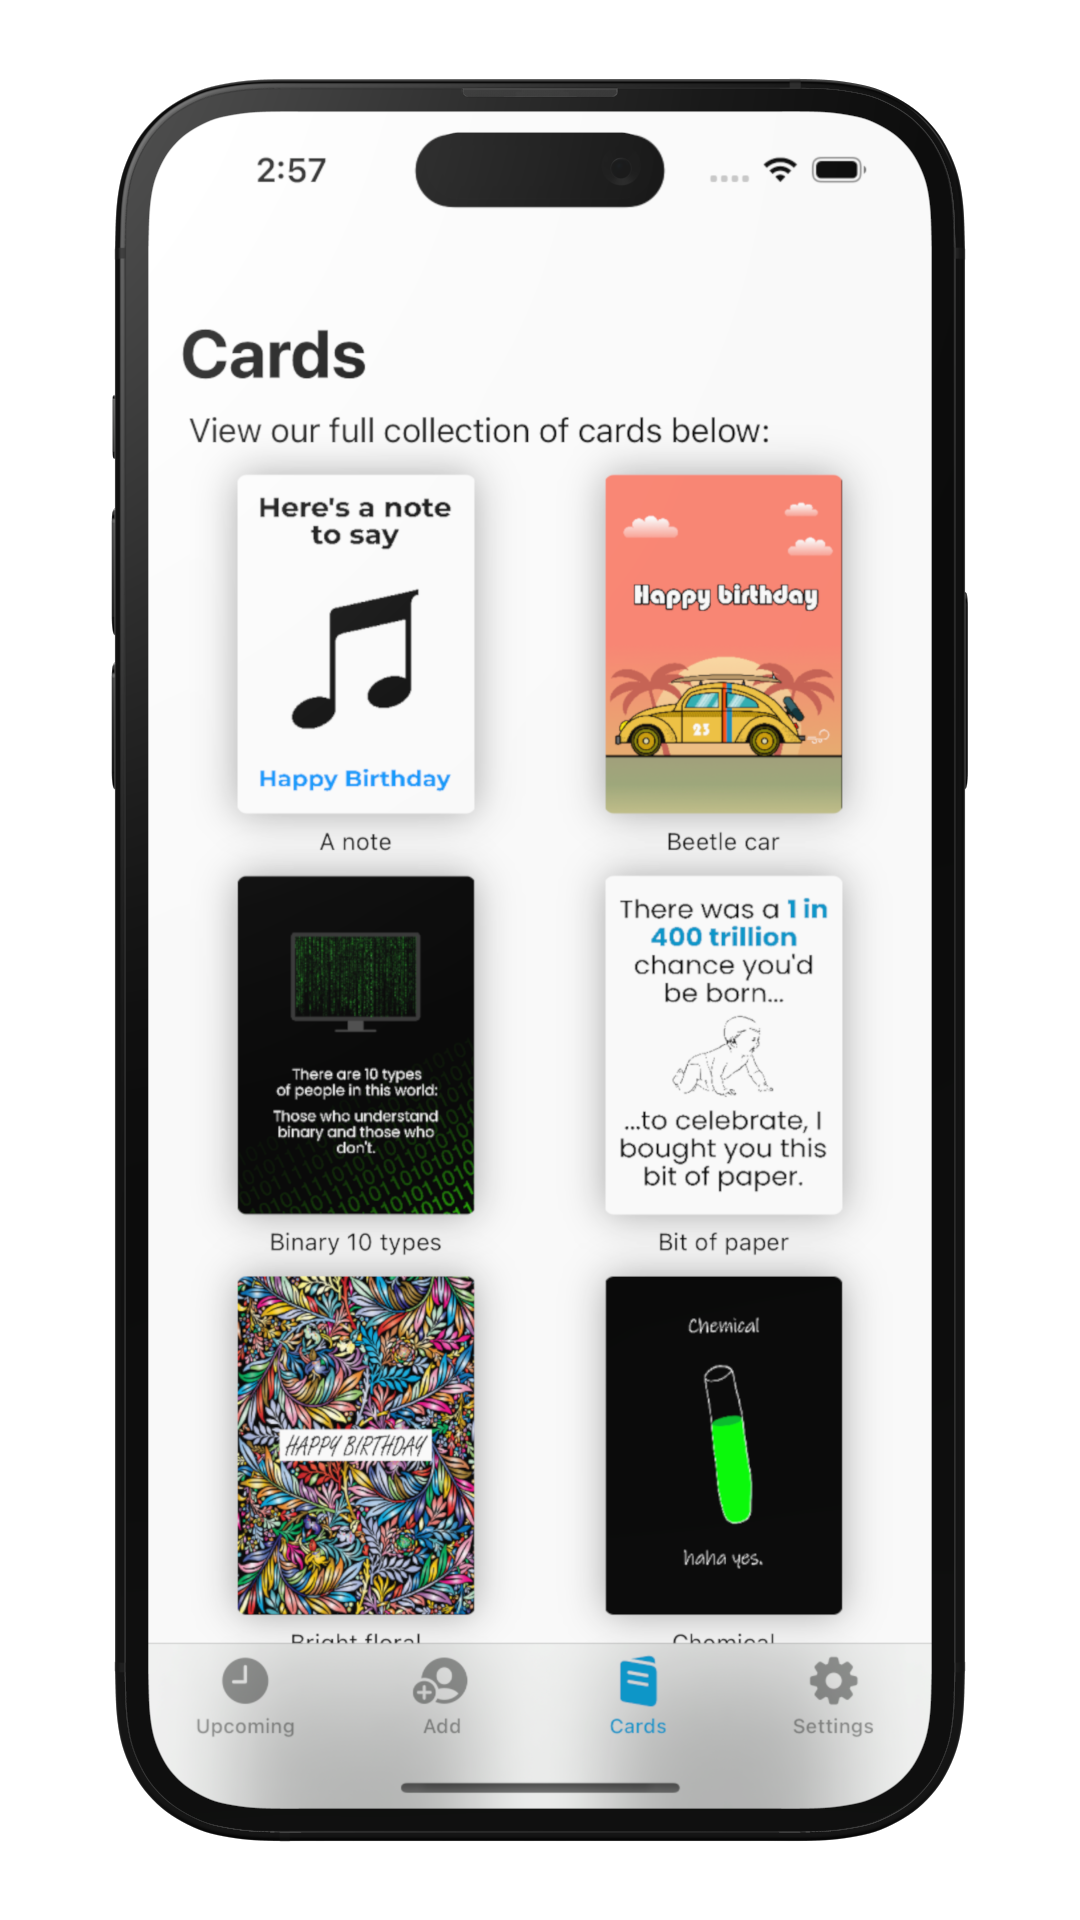 An iPhone showing the collection of cards that are available in the app.